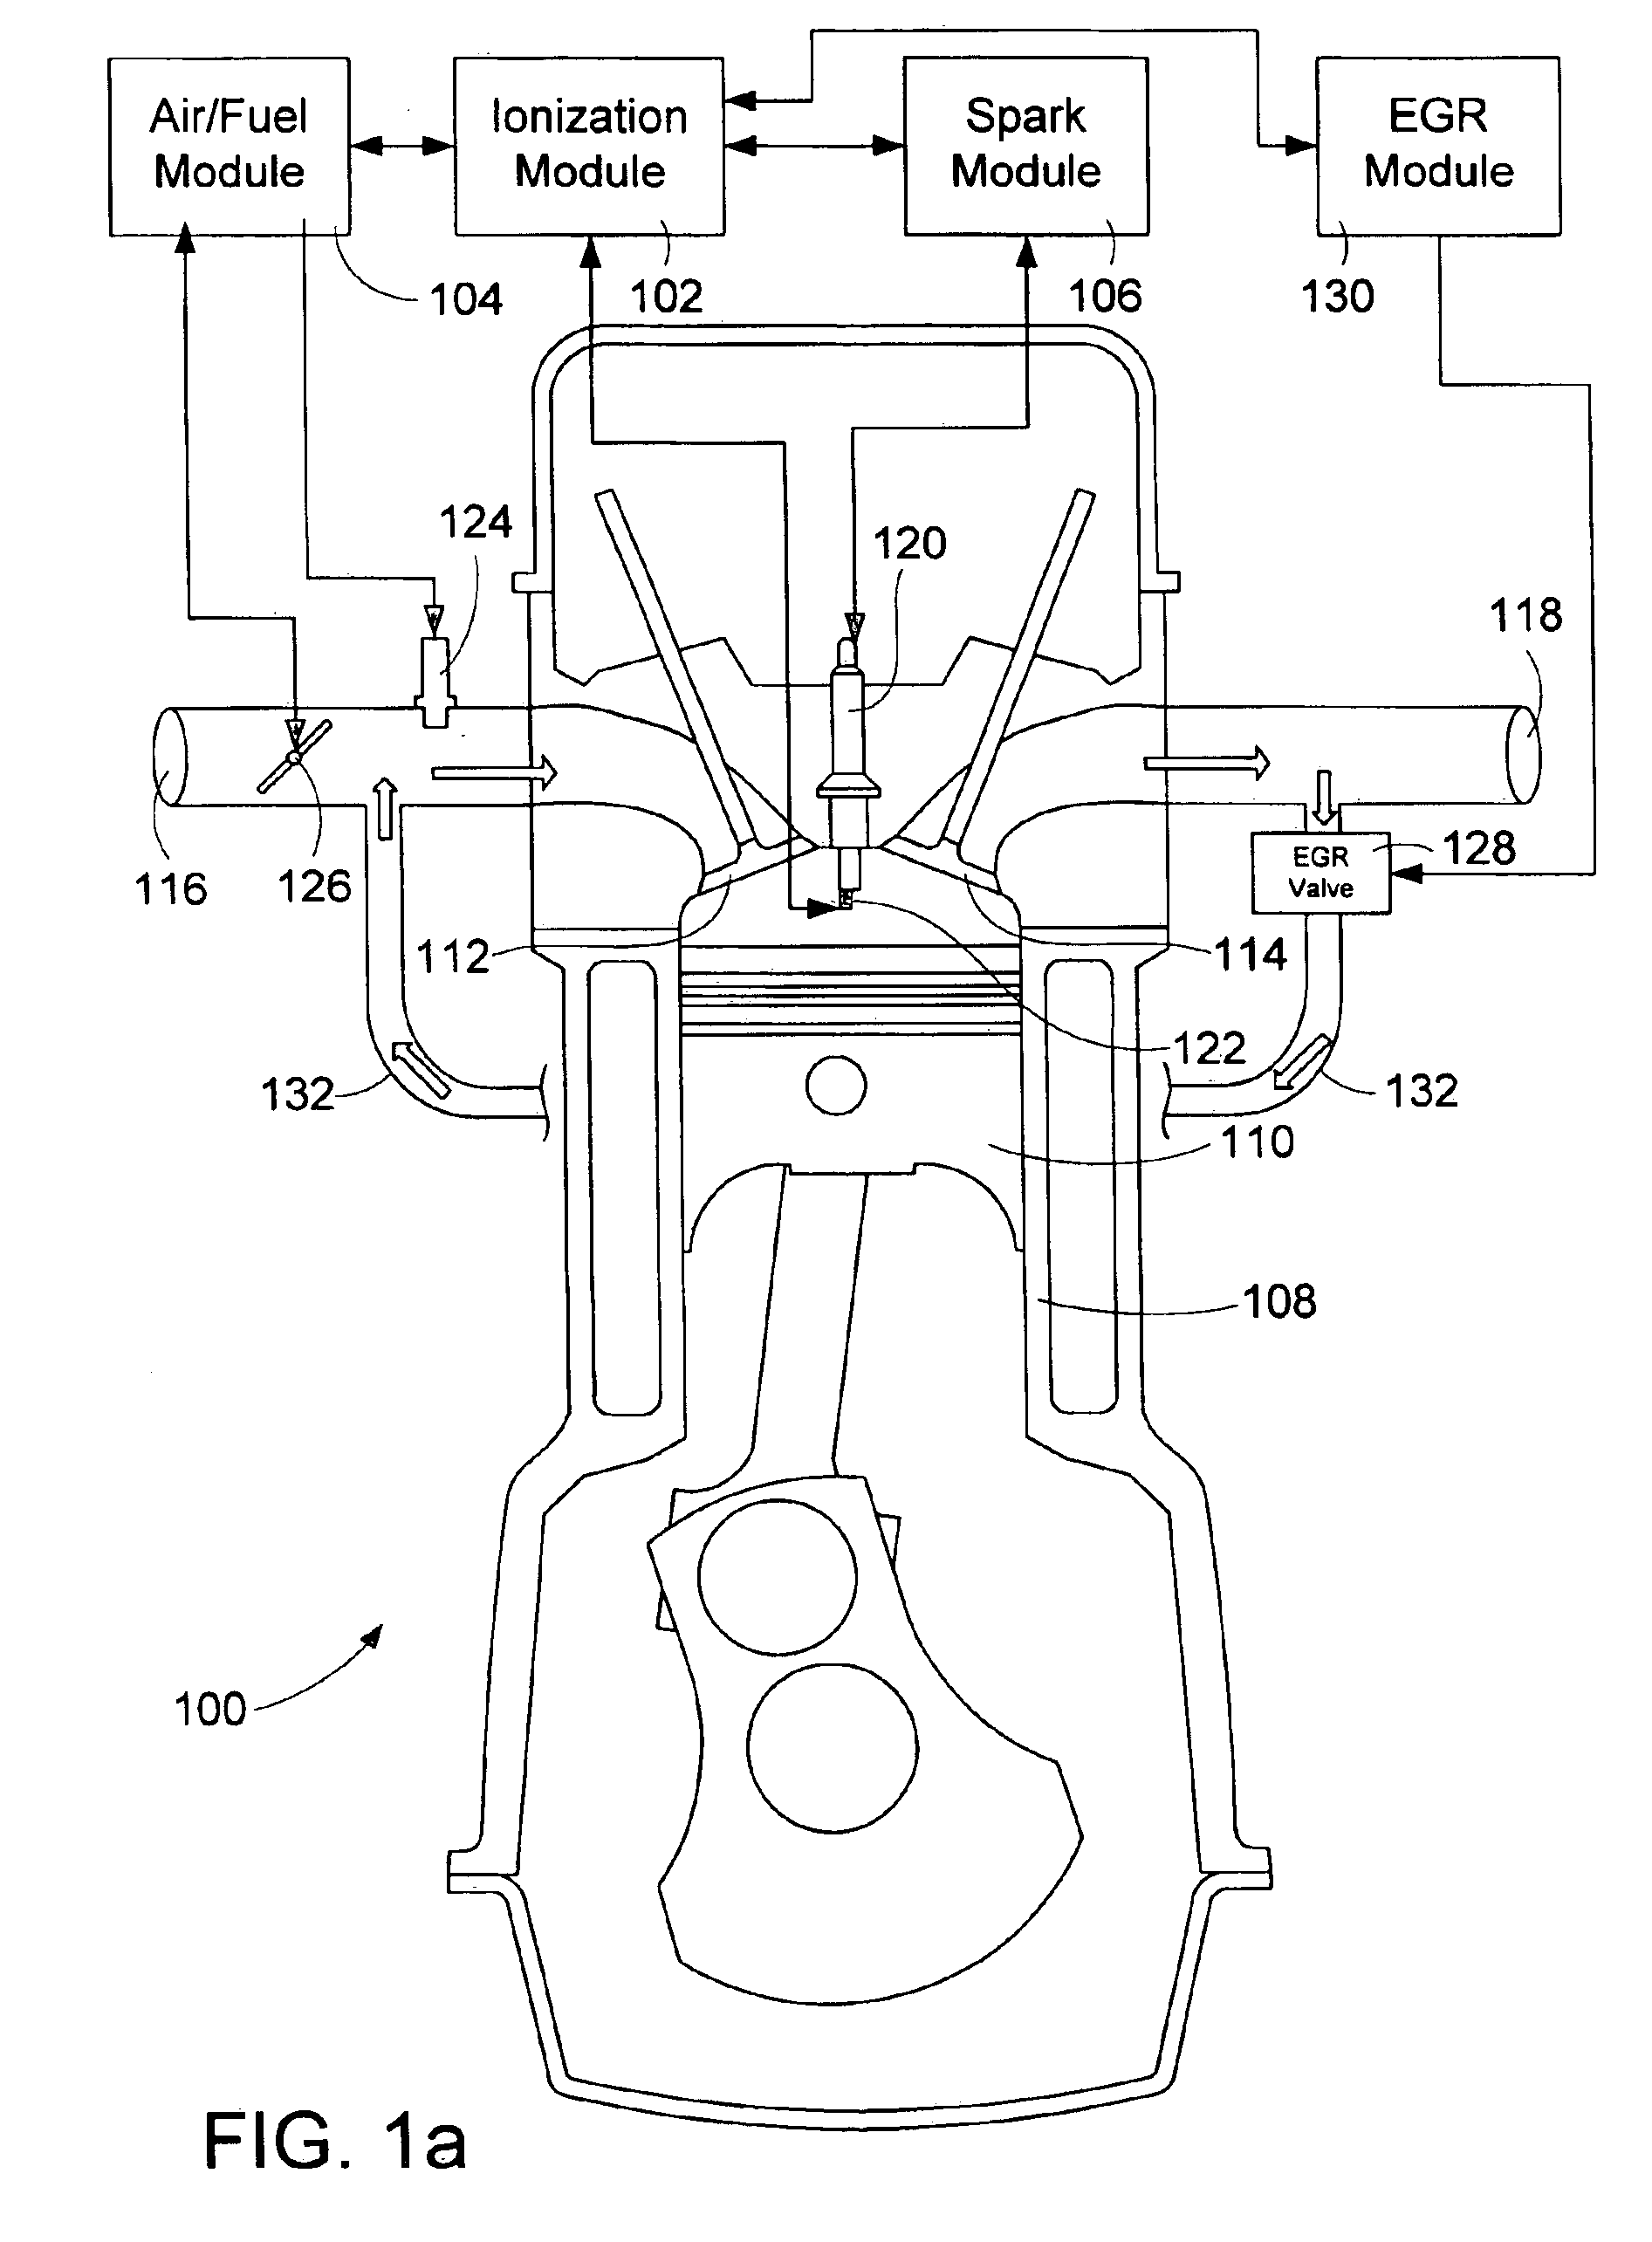 Method and apparatus for detecting abnormal combustion conditions in reciprocating engines having high exhaust gas recirculation